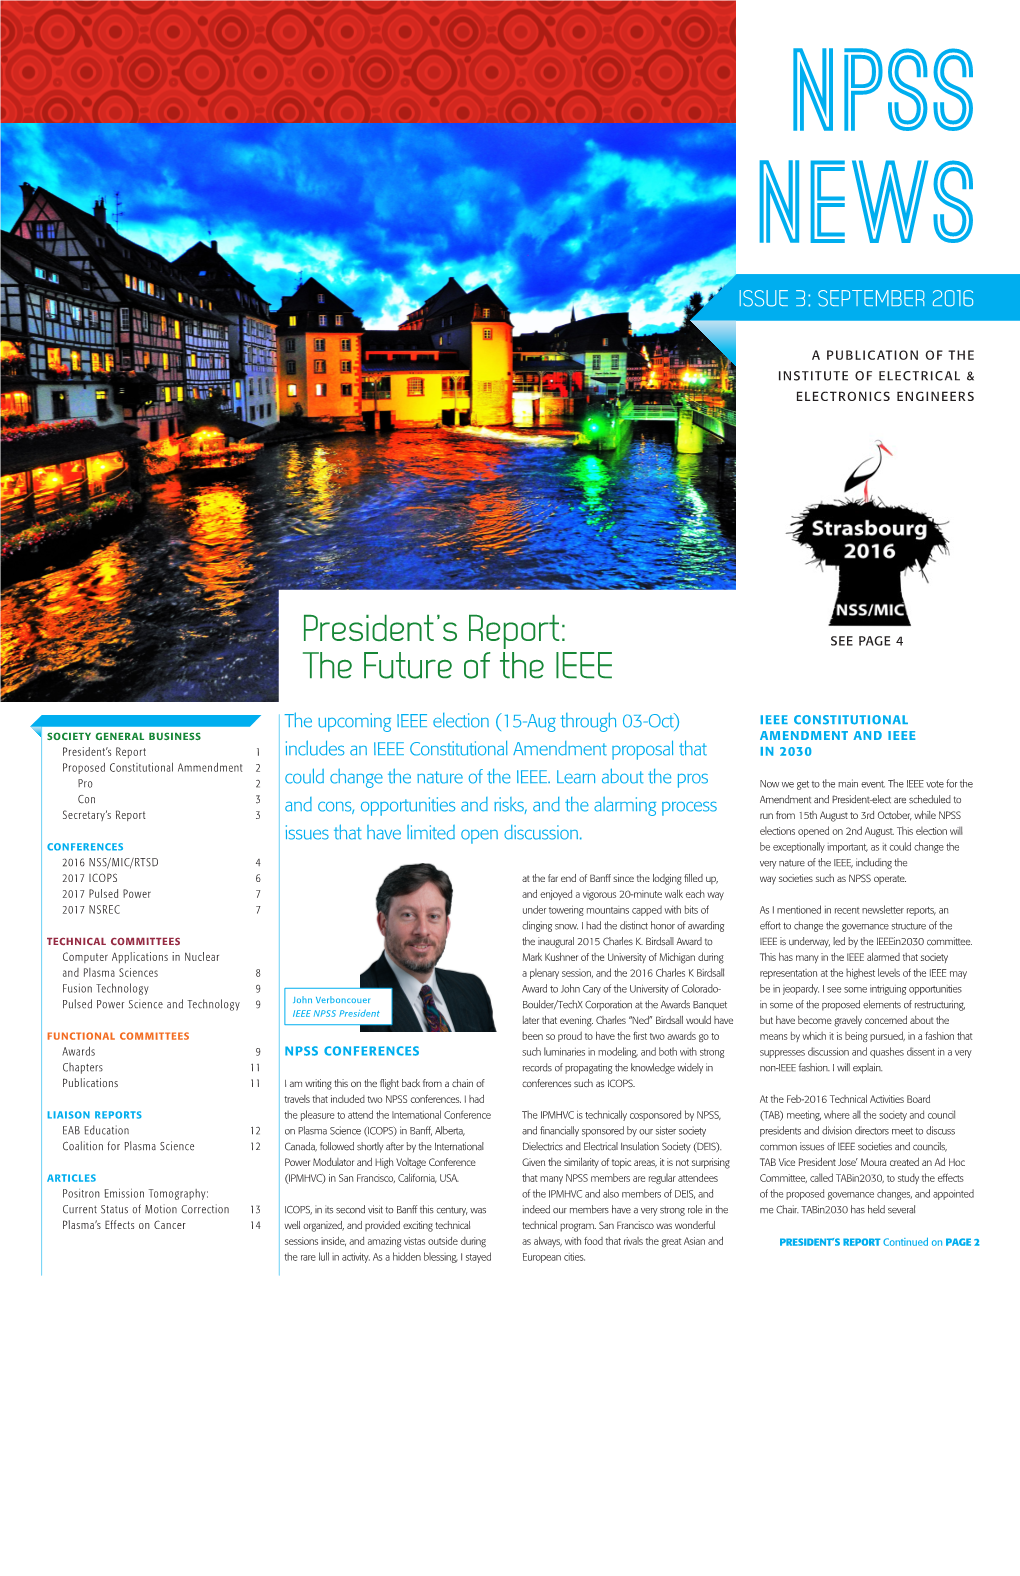 President's Report: the Future of the IEEE